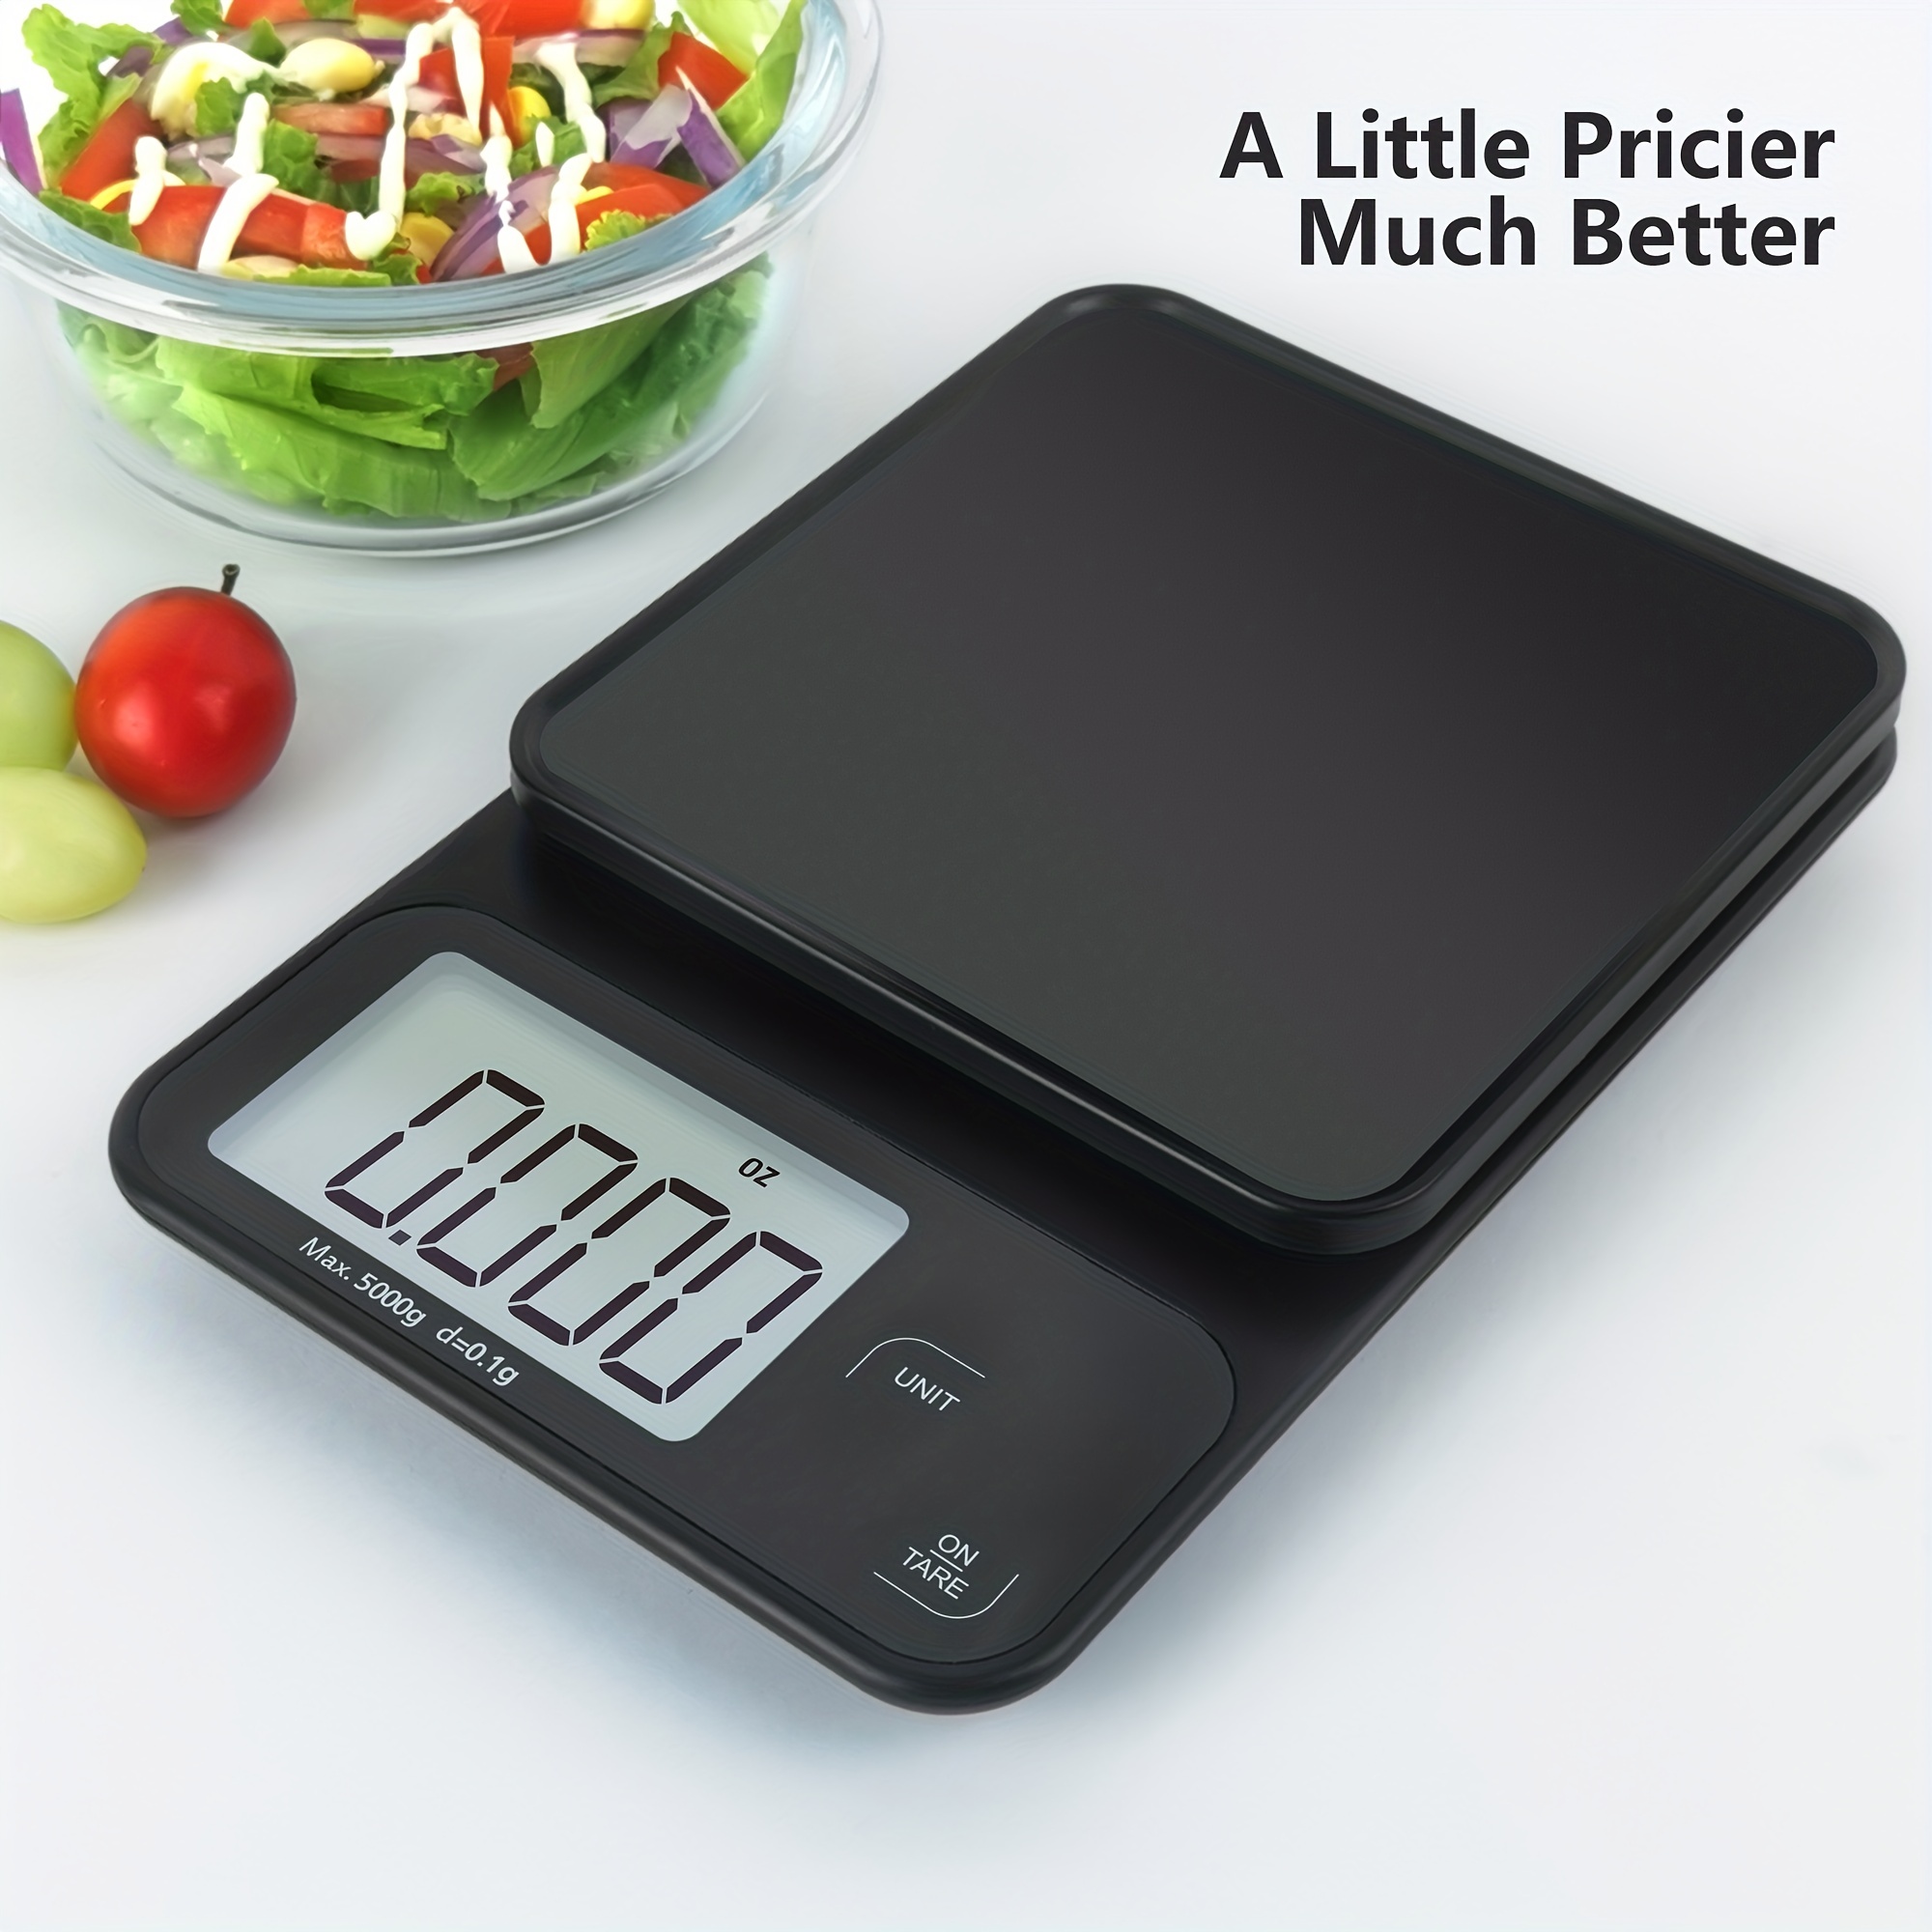 Fuzion Digital Kitchen Scale 3000g/ 0.1g, Pocket Food Scale 6 Measure Modes, LCD, Tare, Digital Scale Grams and Ounces with 2 Trays for Food